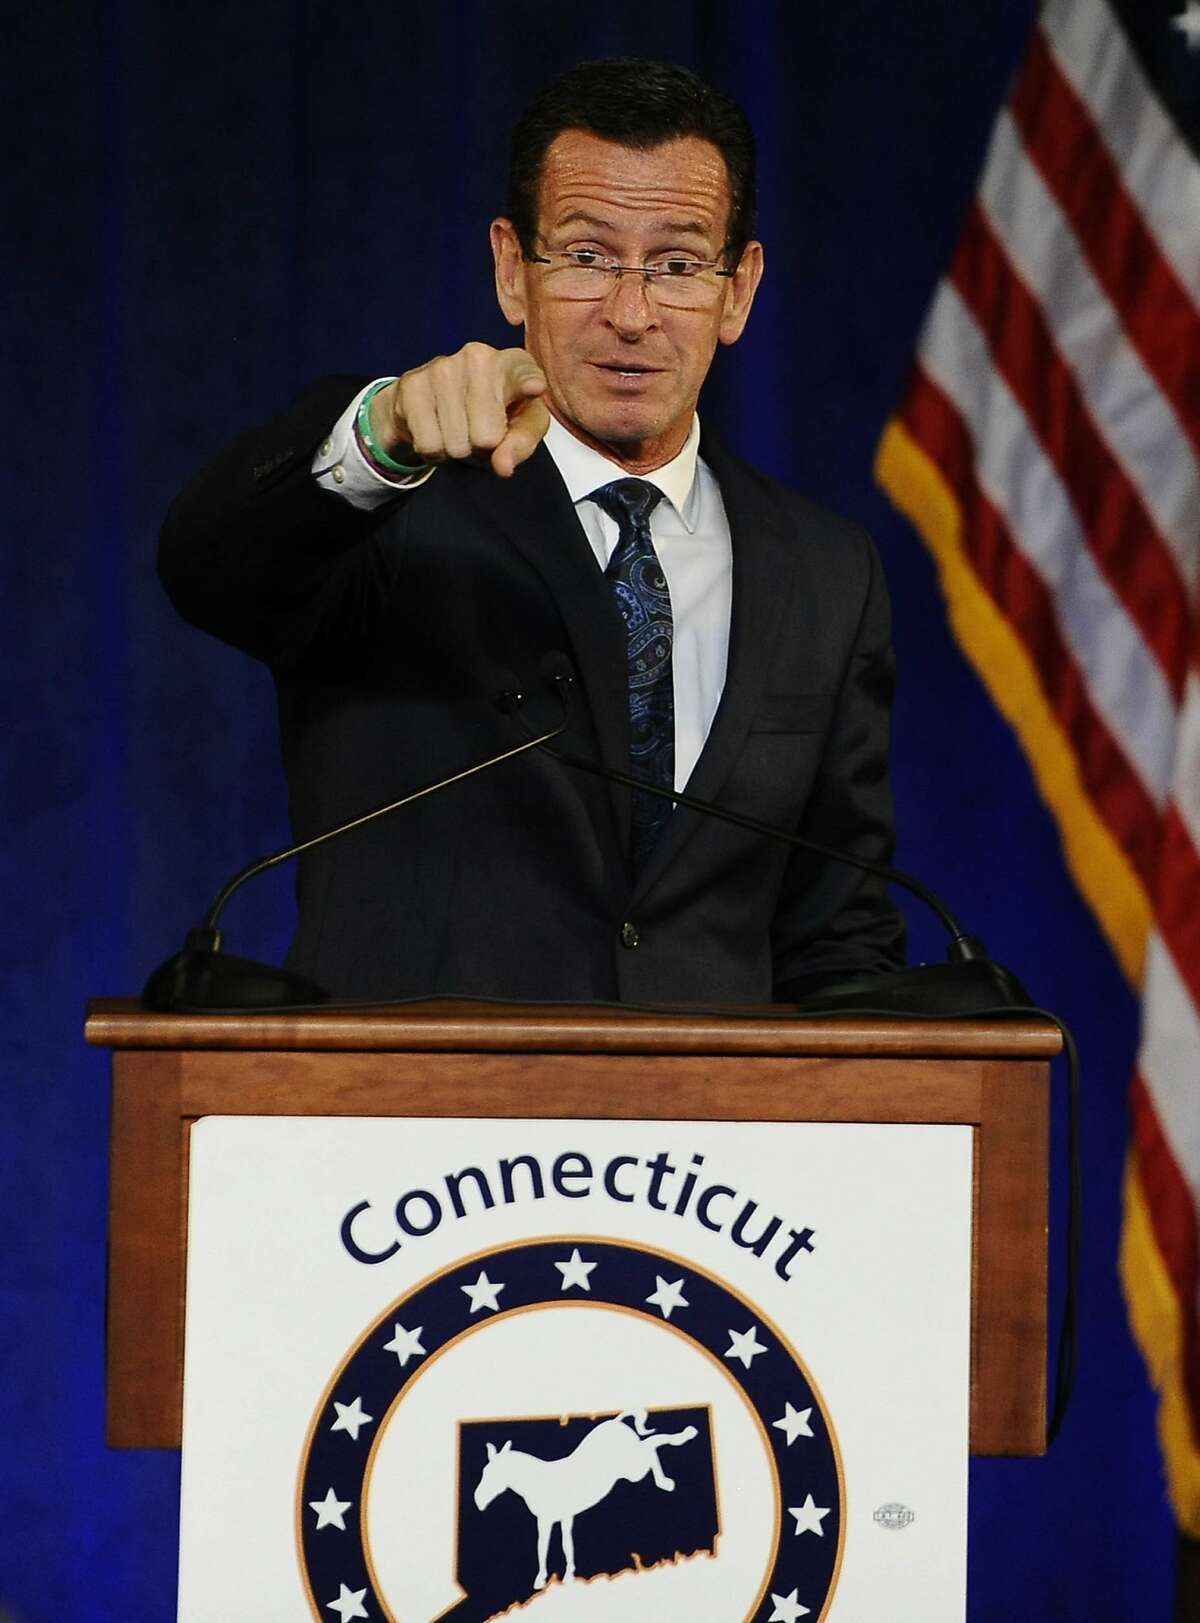 Gov. Dannel P. Malloy points at a rally with former President Bill Clinton, Monday, Oct. 13, 2014, in Hartford, Conn. (AP Photo/Jessica Hill)